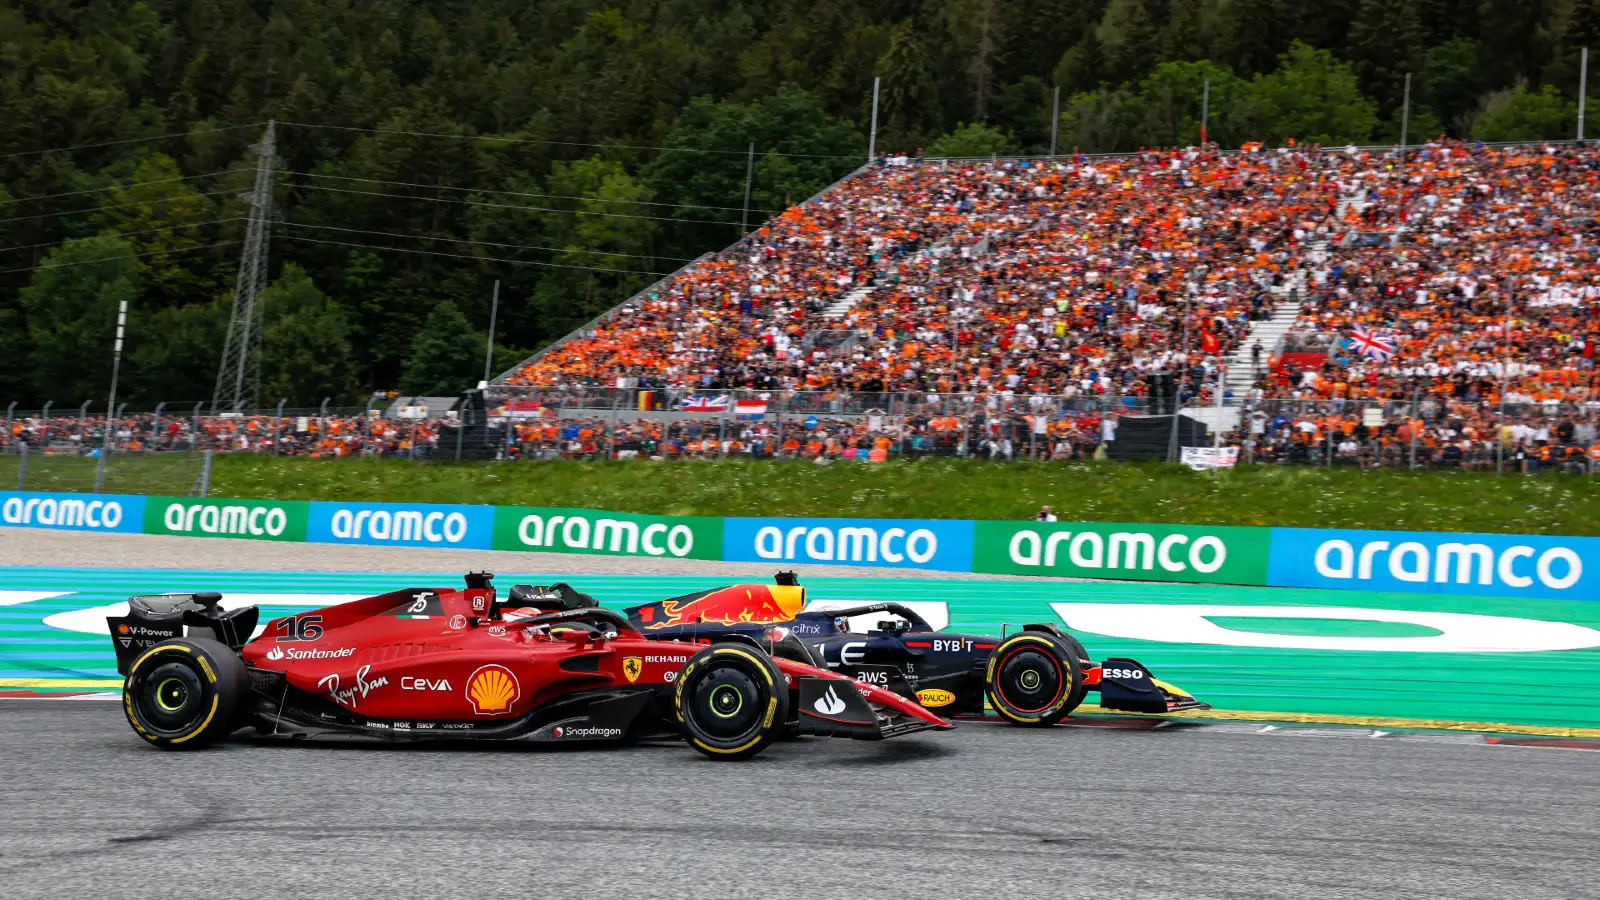 Ferrari's Charles Leclerc and Red Bull's Max Verstappen battle at the Austrian Grand Prix. Spielberg, July 2022.